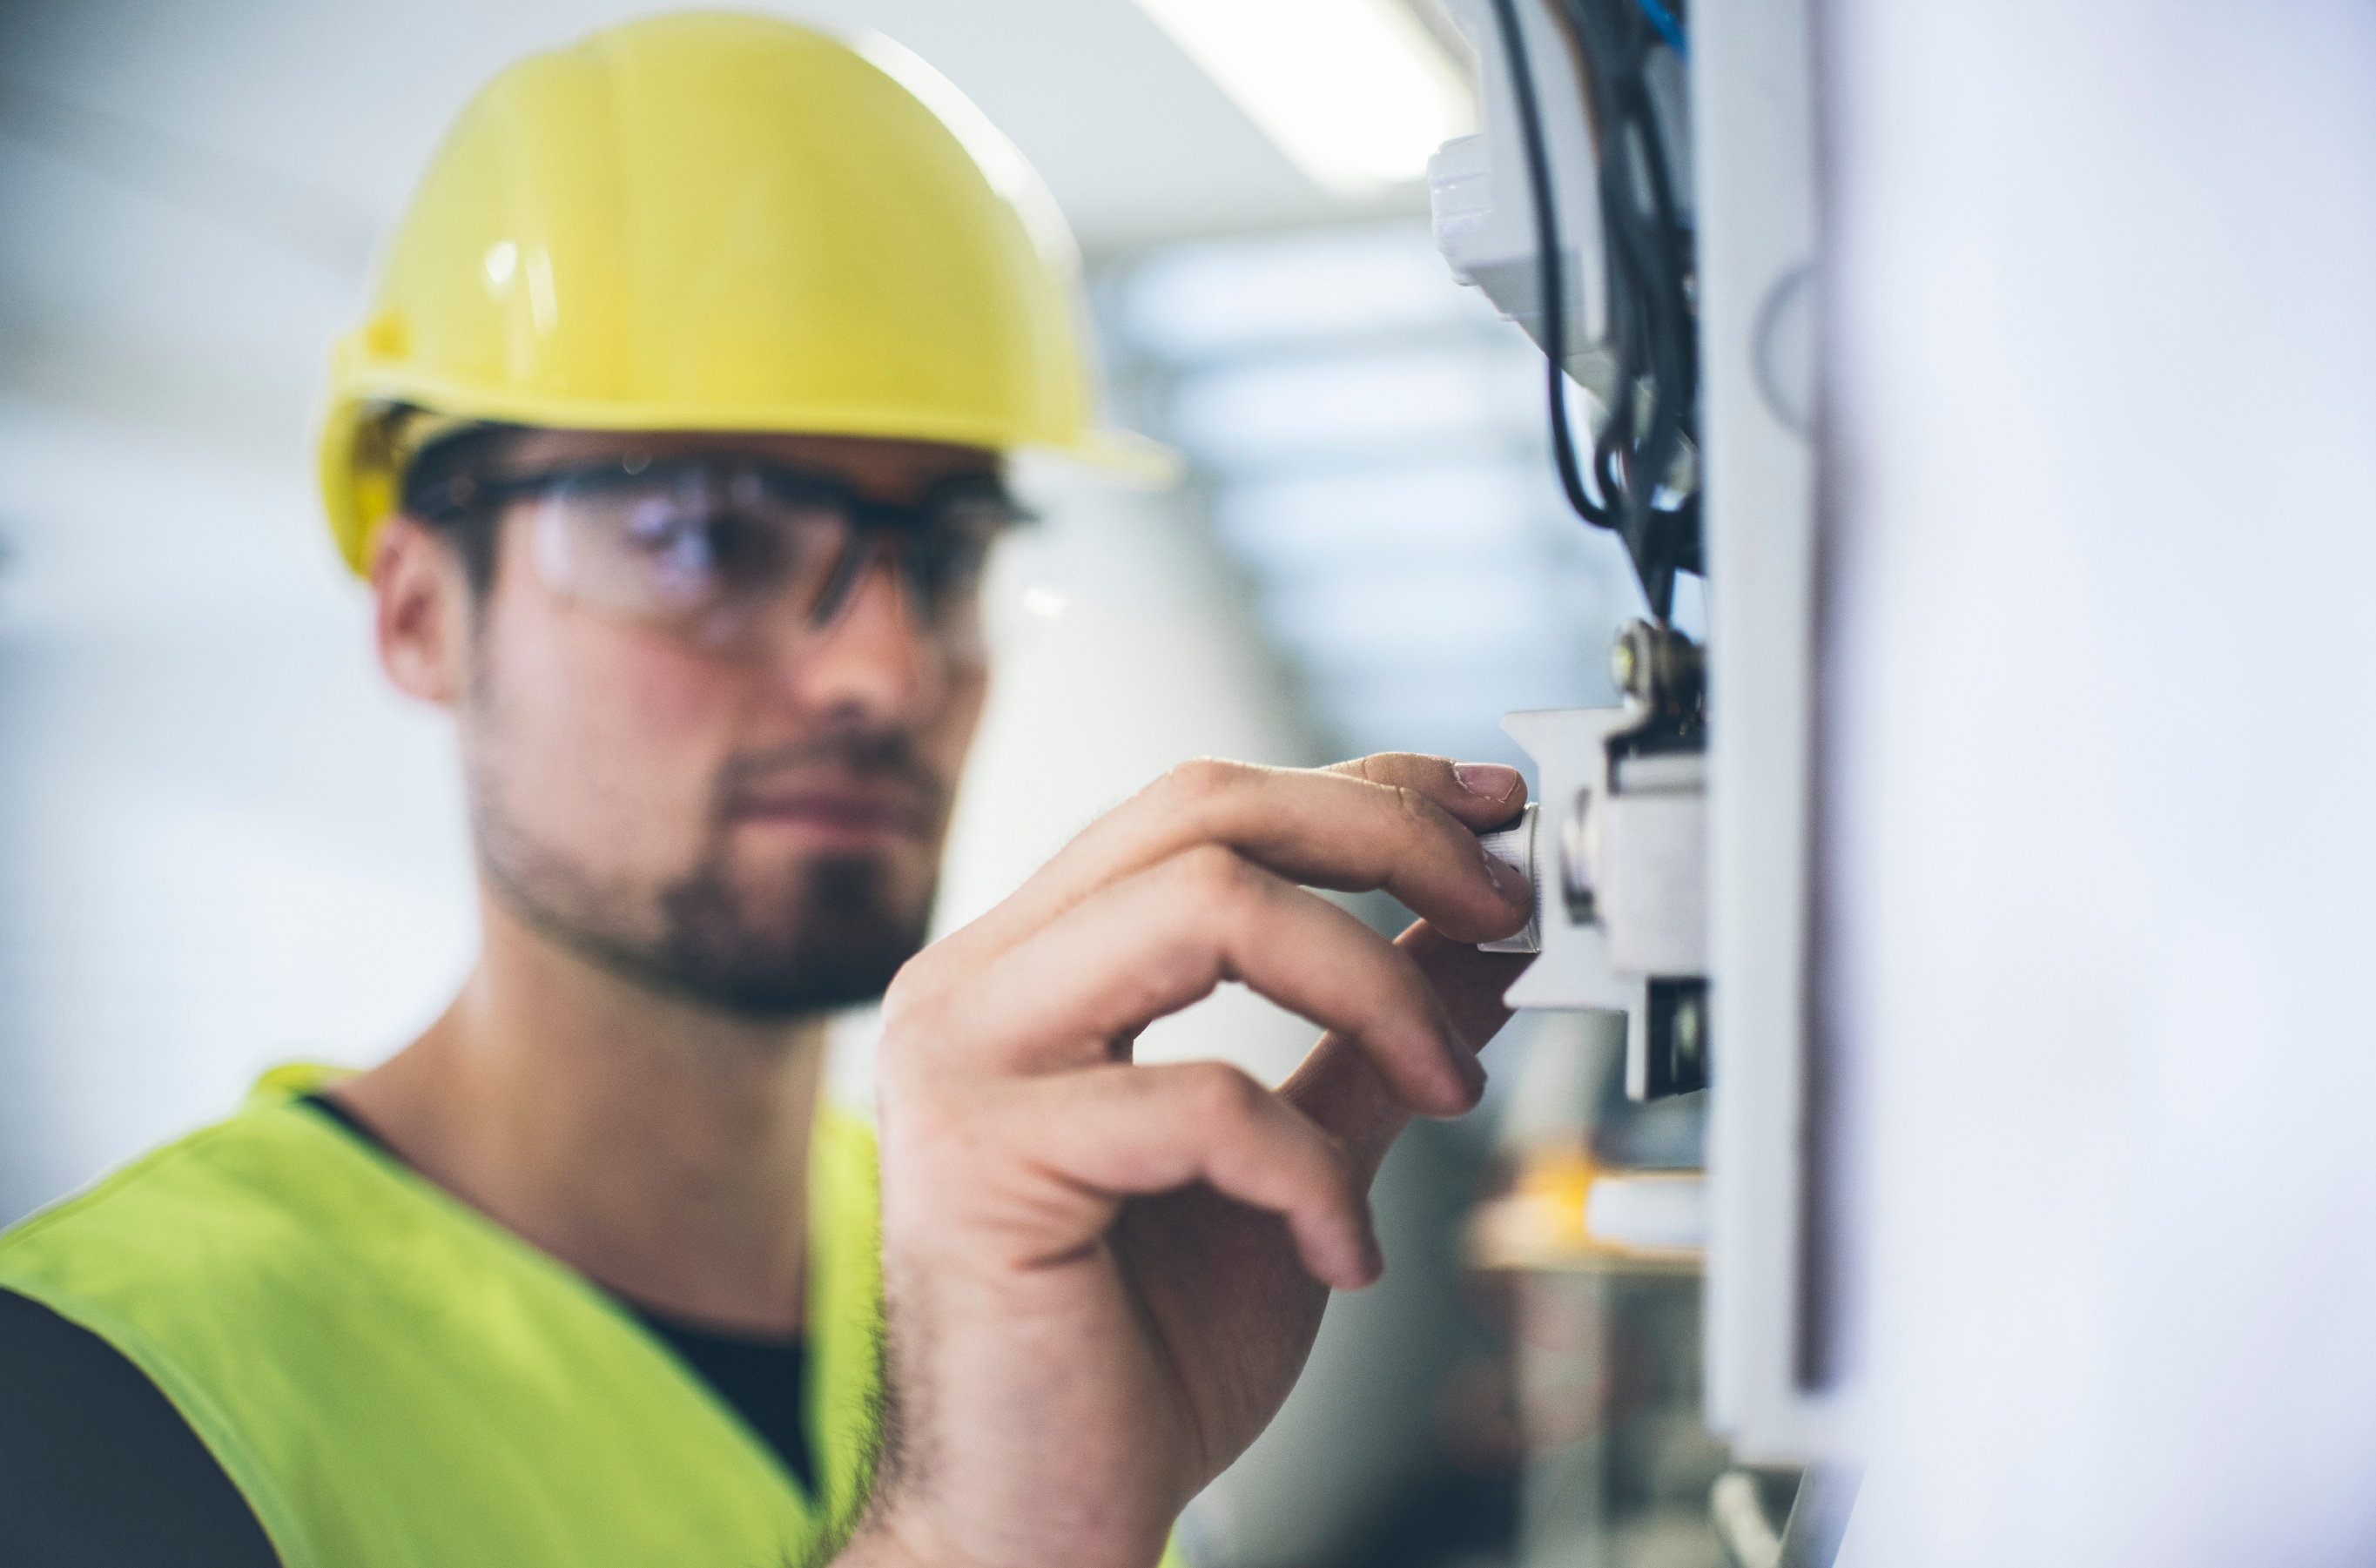 How To Achieve Near-Zero Downtime With Preventative Maintenance And Condition Monitoring